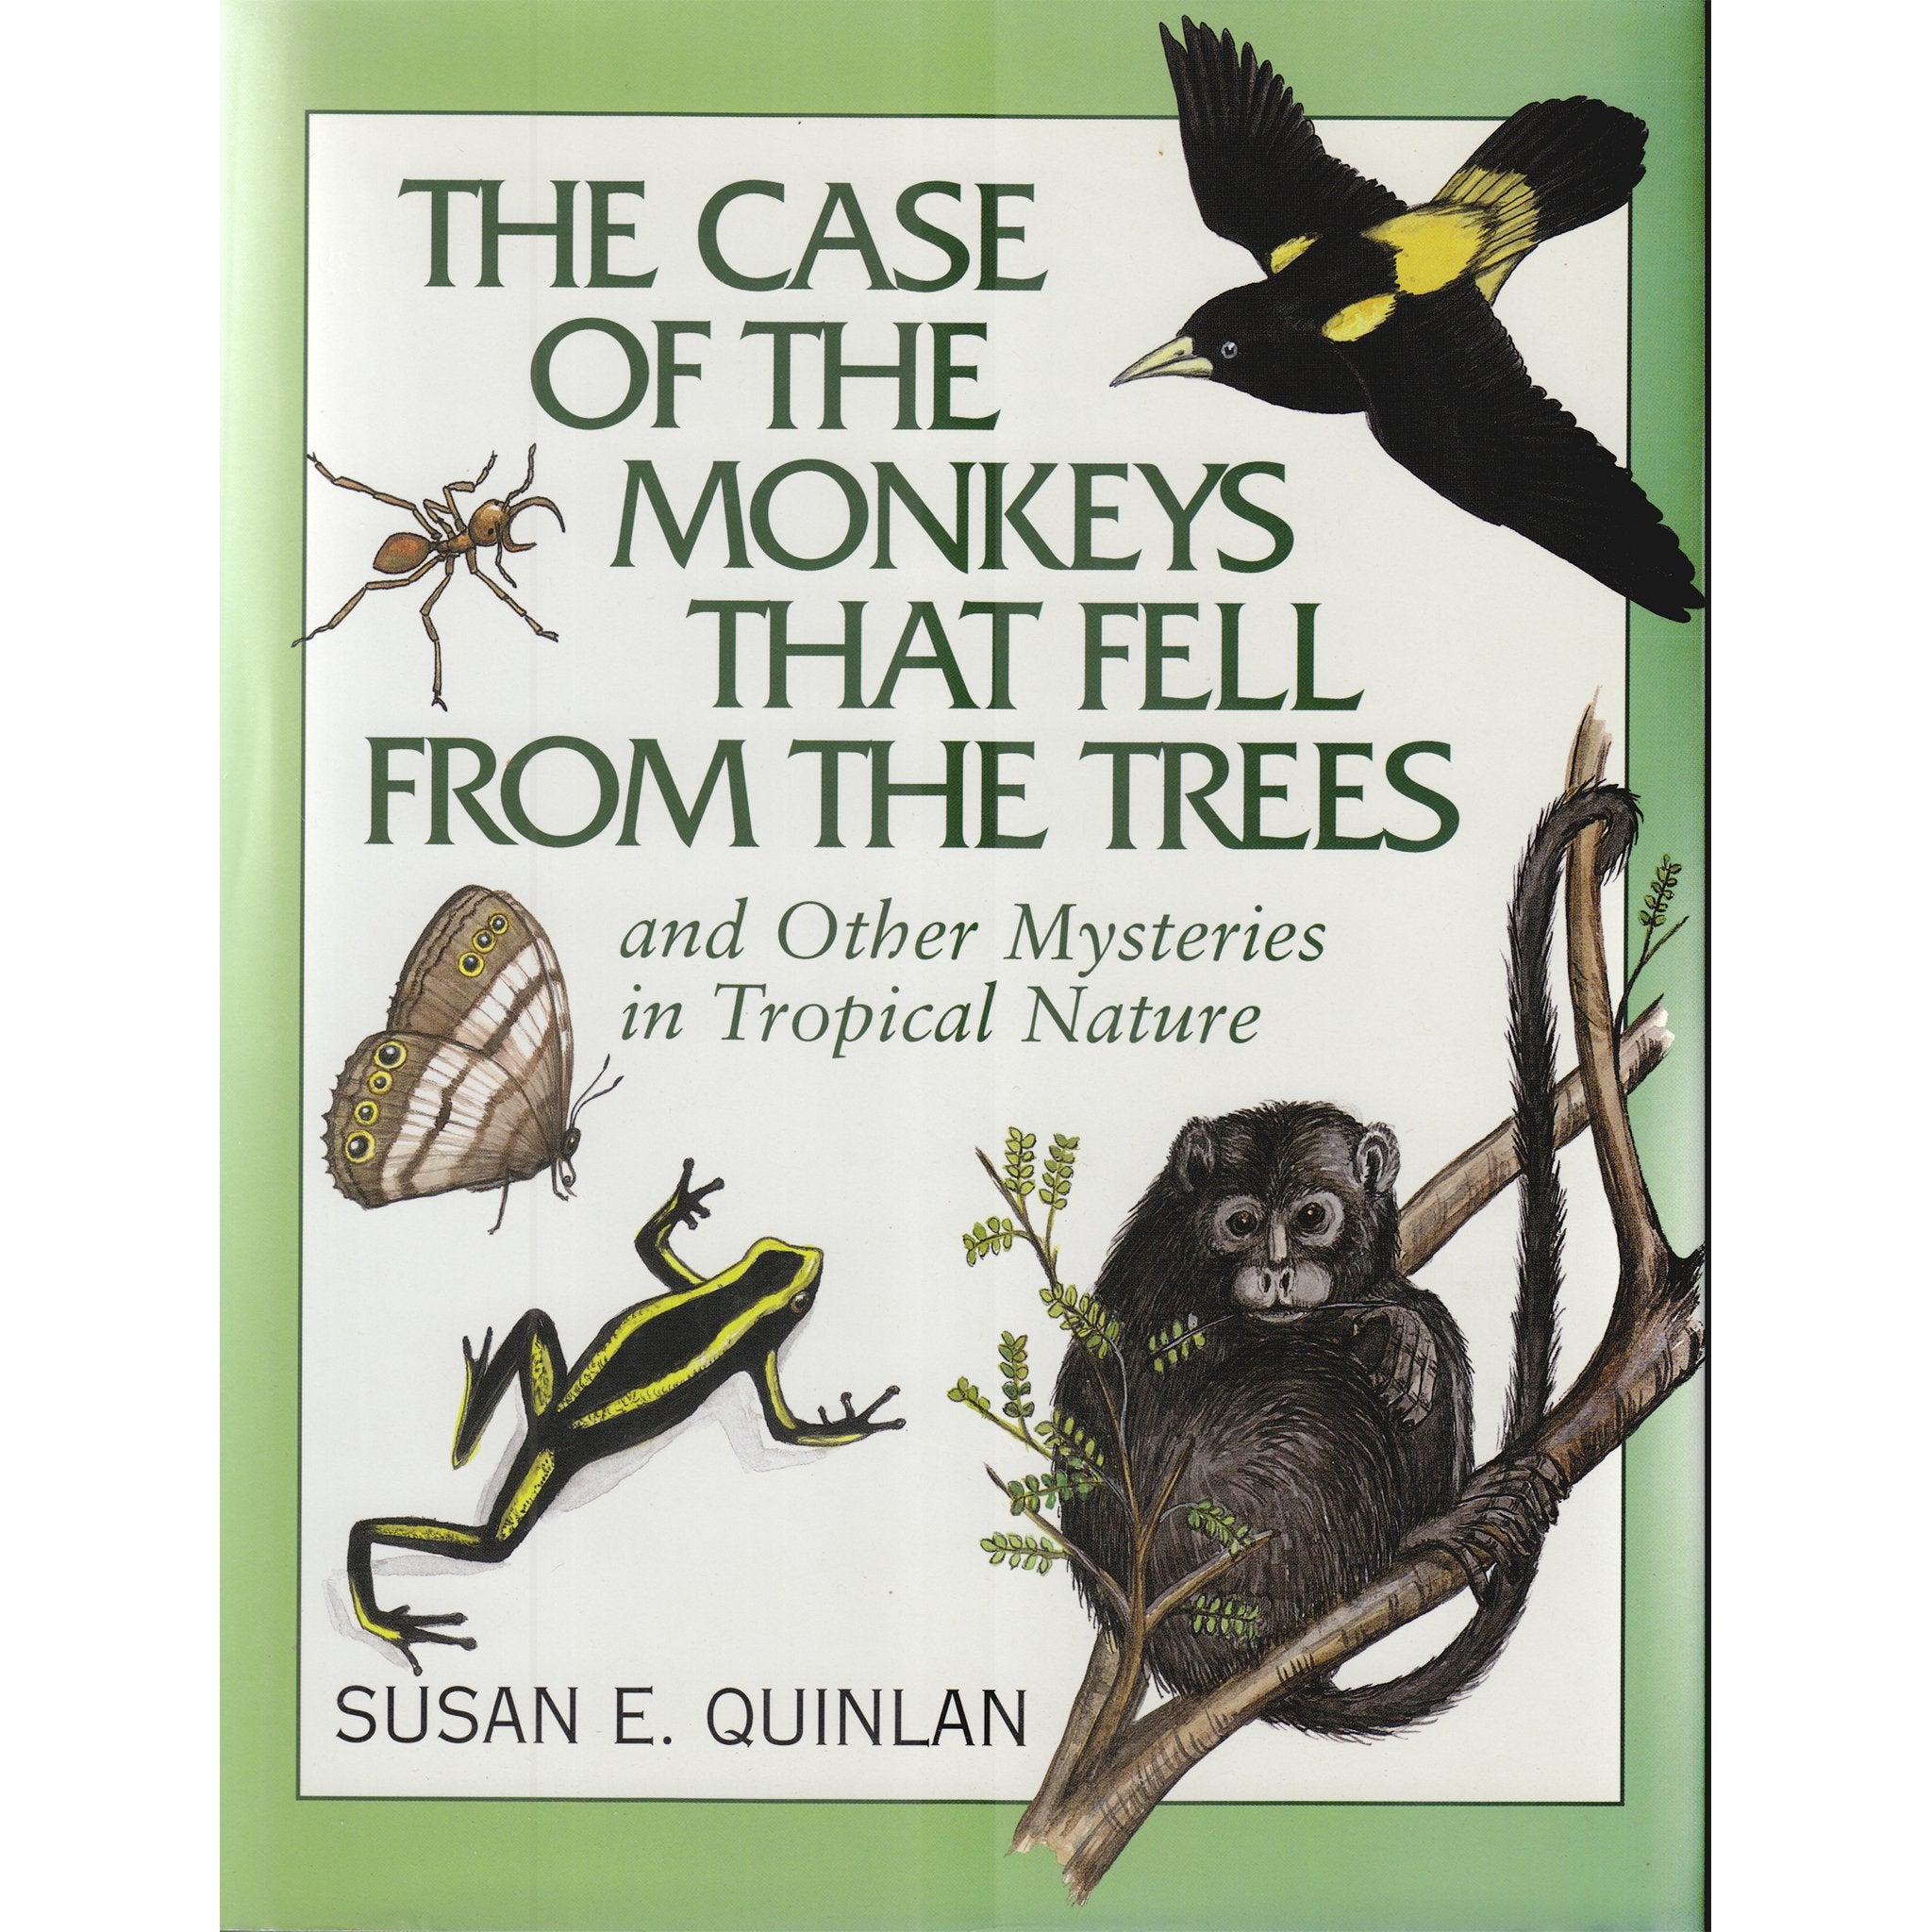 The Case of the Monkeys That Fell From the Trees